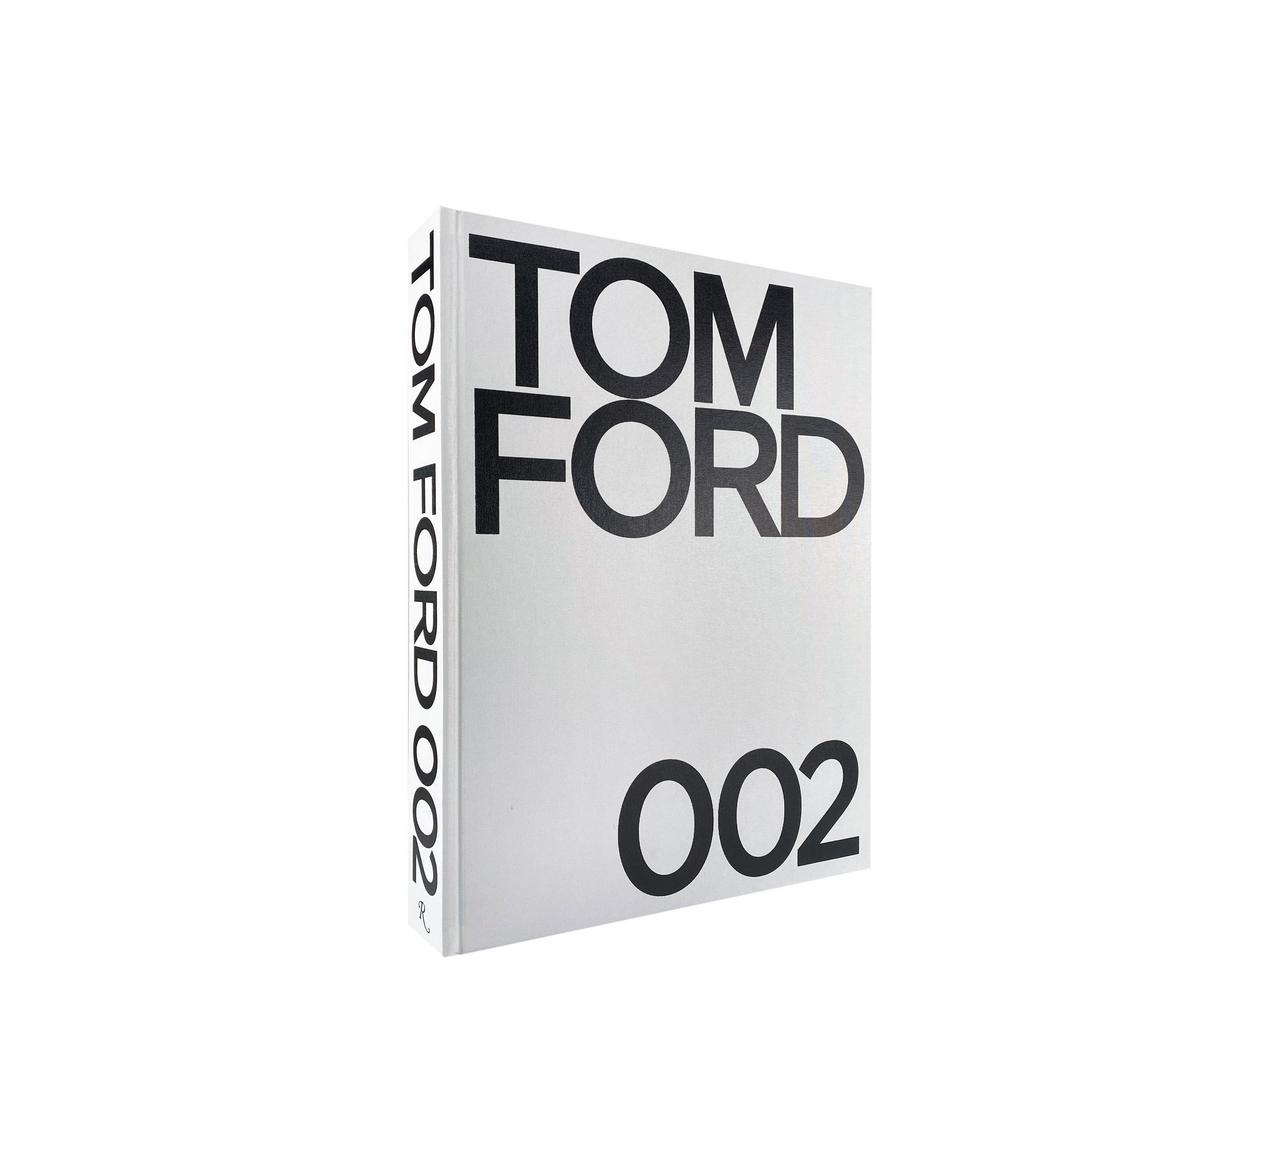 Tom Ford 002 Hardcover Book - FW21 - US